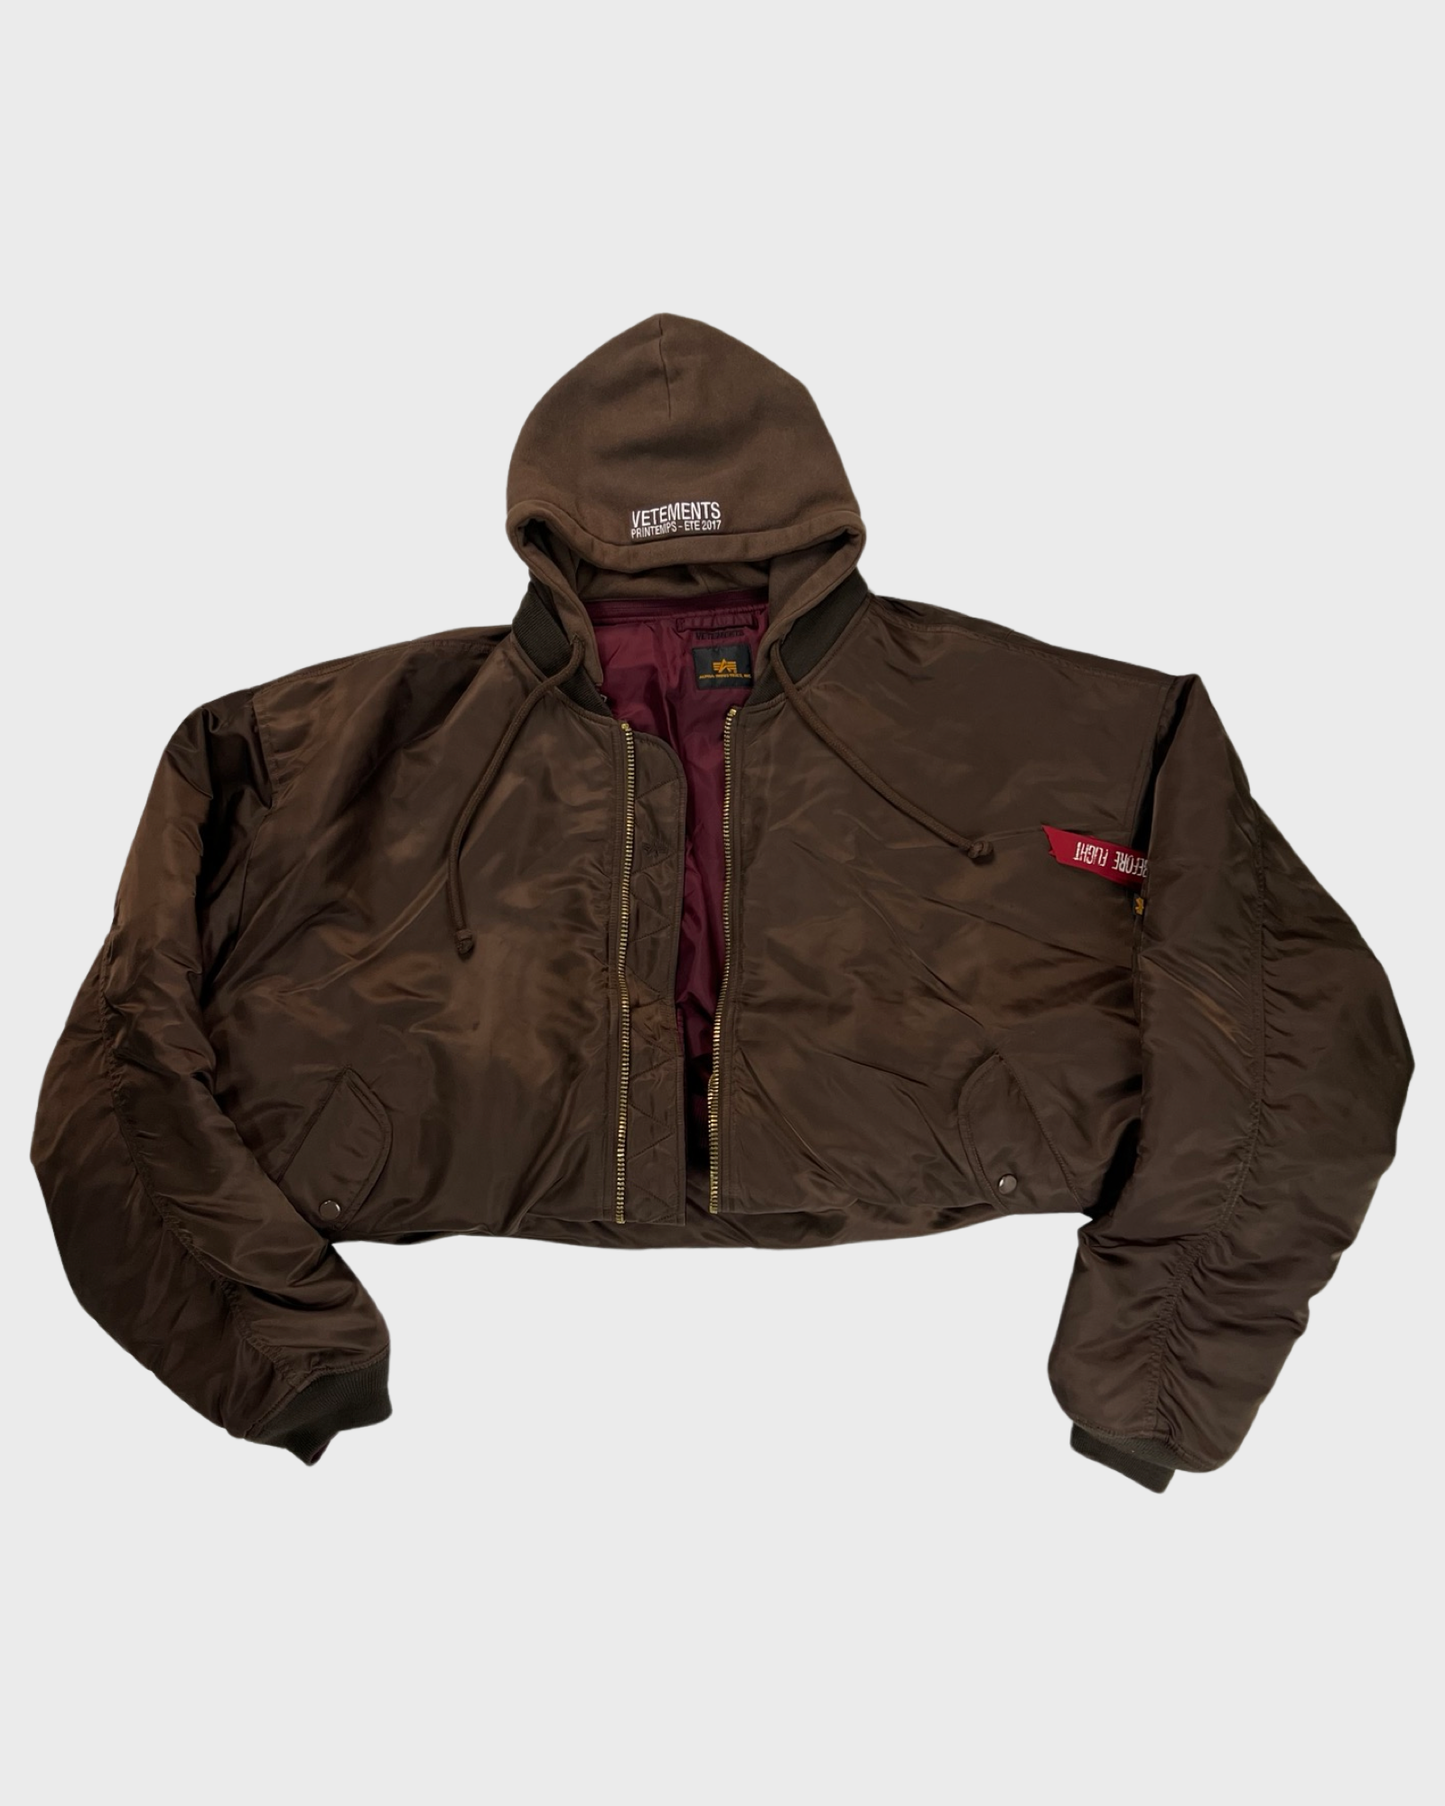 Vetements SS17 runway reversible foldable MA1 Bomber Jacket in brown & wine red SZ:S